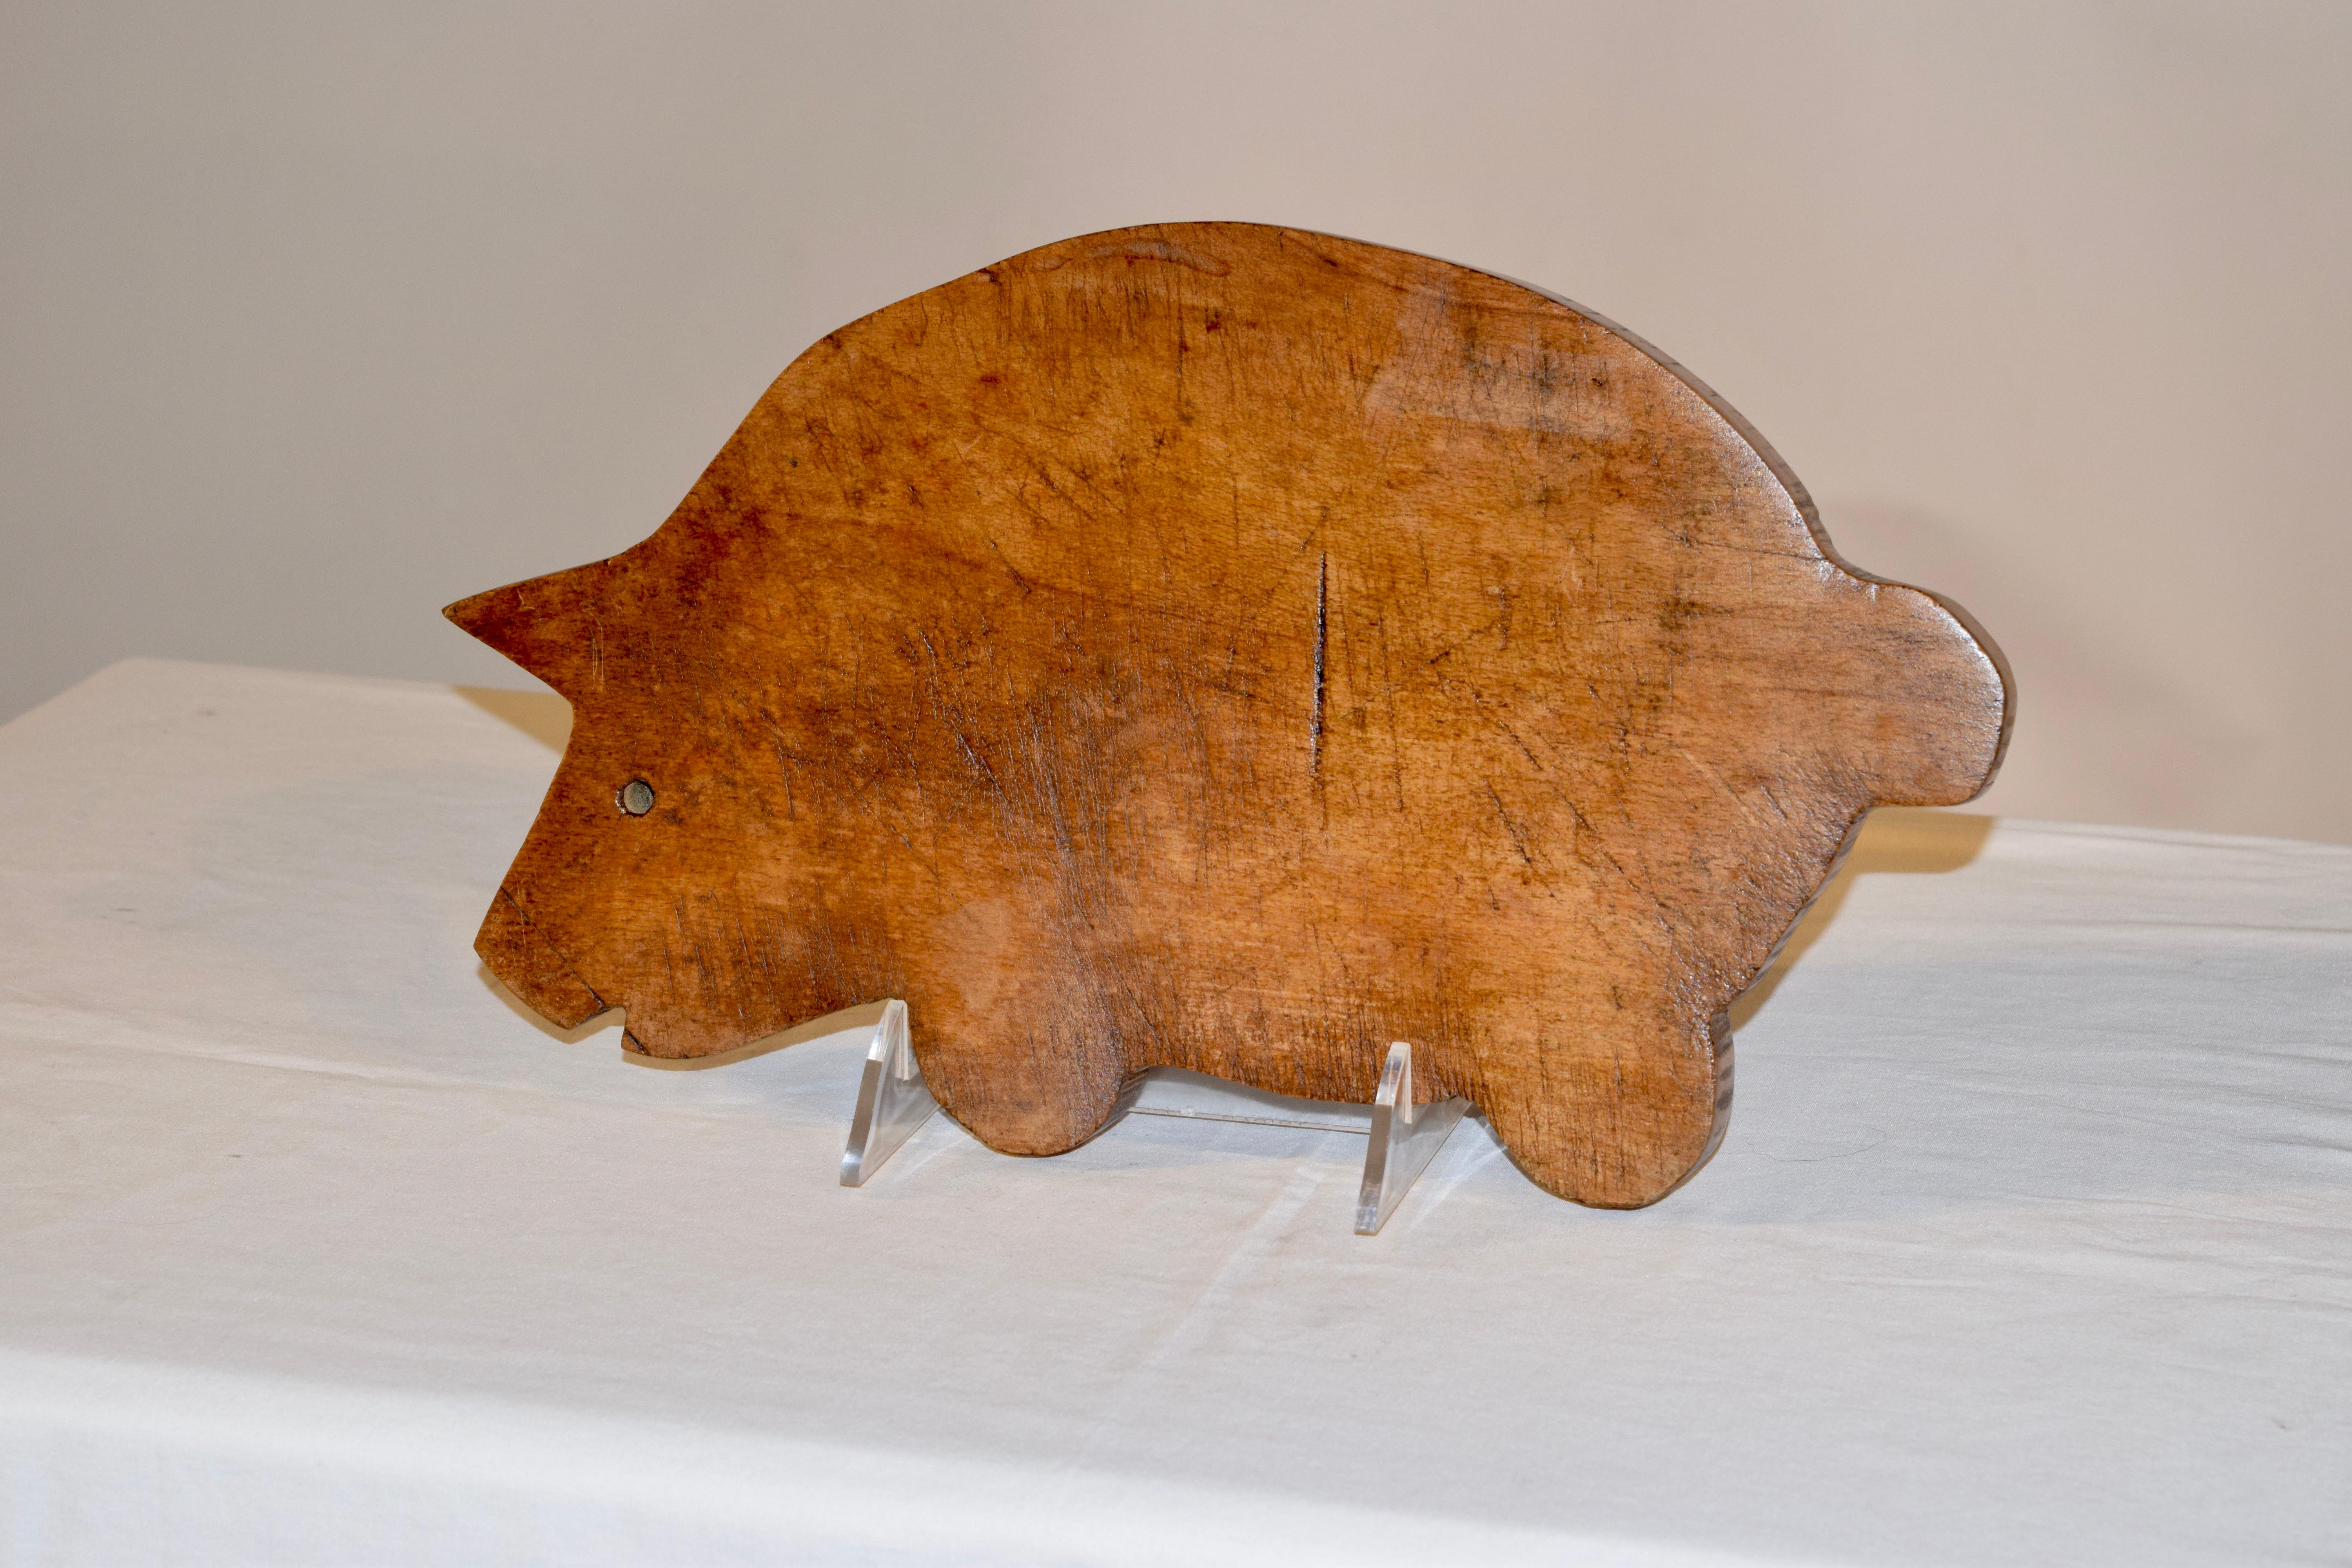 Early 20th century cutting board in the shape of a pig made in England. The board is made from sycamore and is so charming! A great addition to any collection.